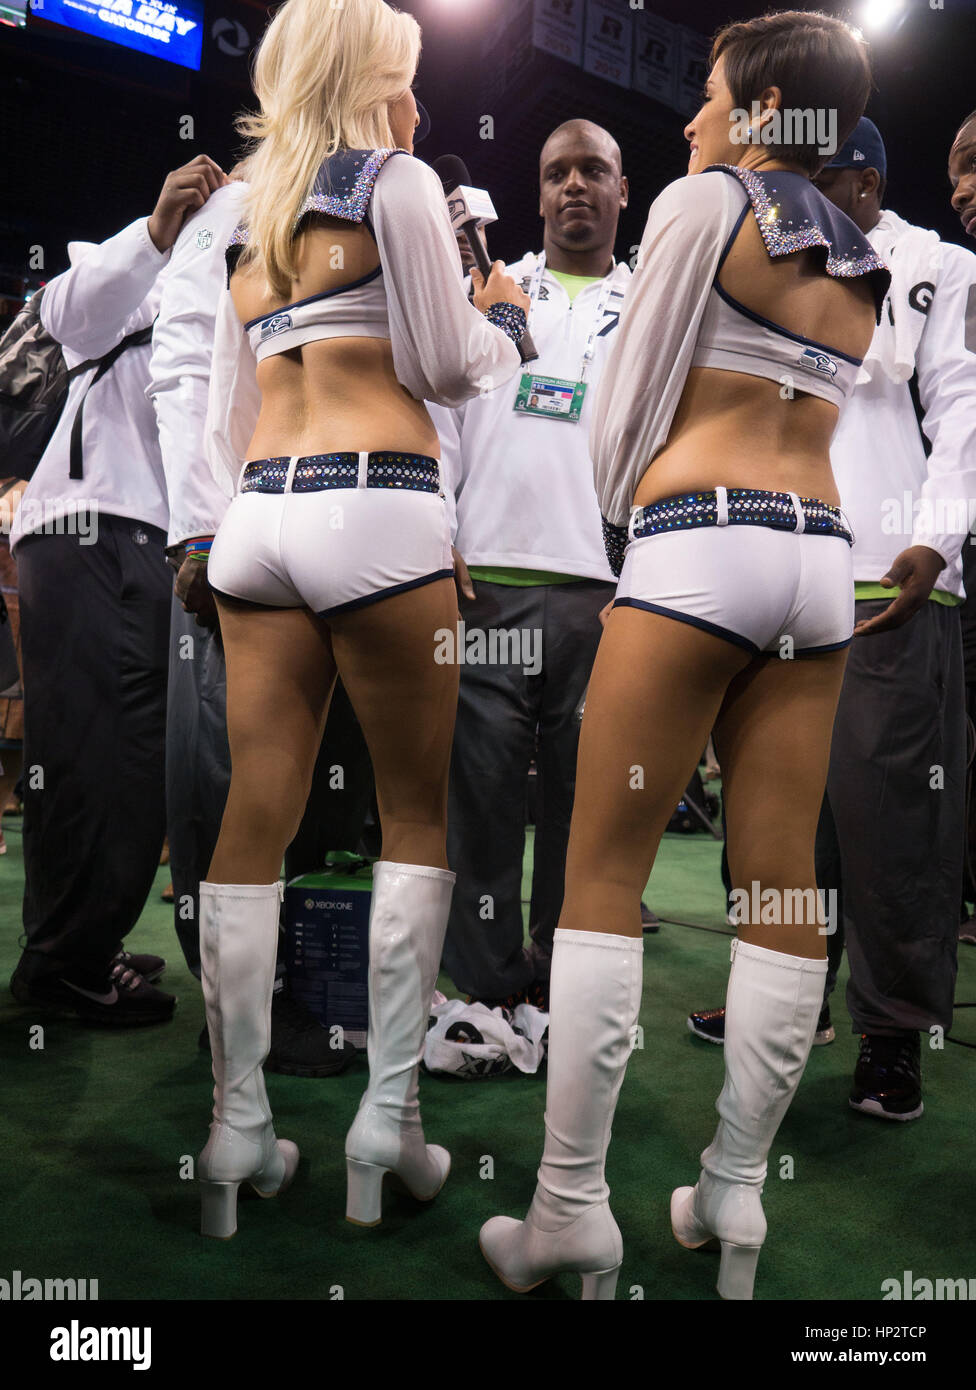 Seattle Seahawks cheerleaders interview the Seahawks players on Super Bowl Media Day on January 27, 2015 in Phoenix, Arizona. Photo by Francis Specker Stock Photo